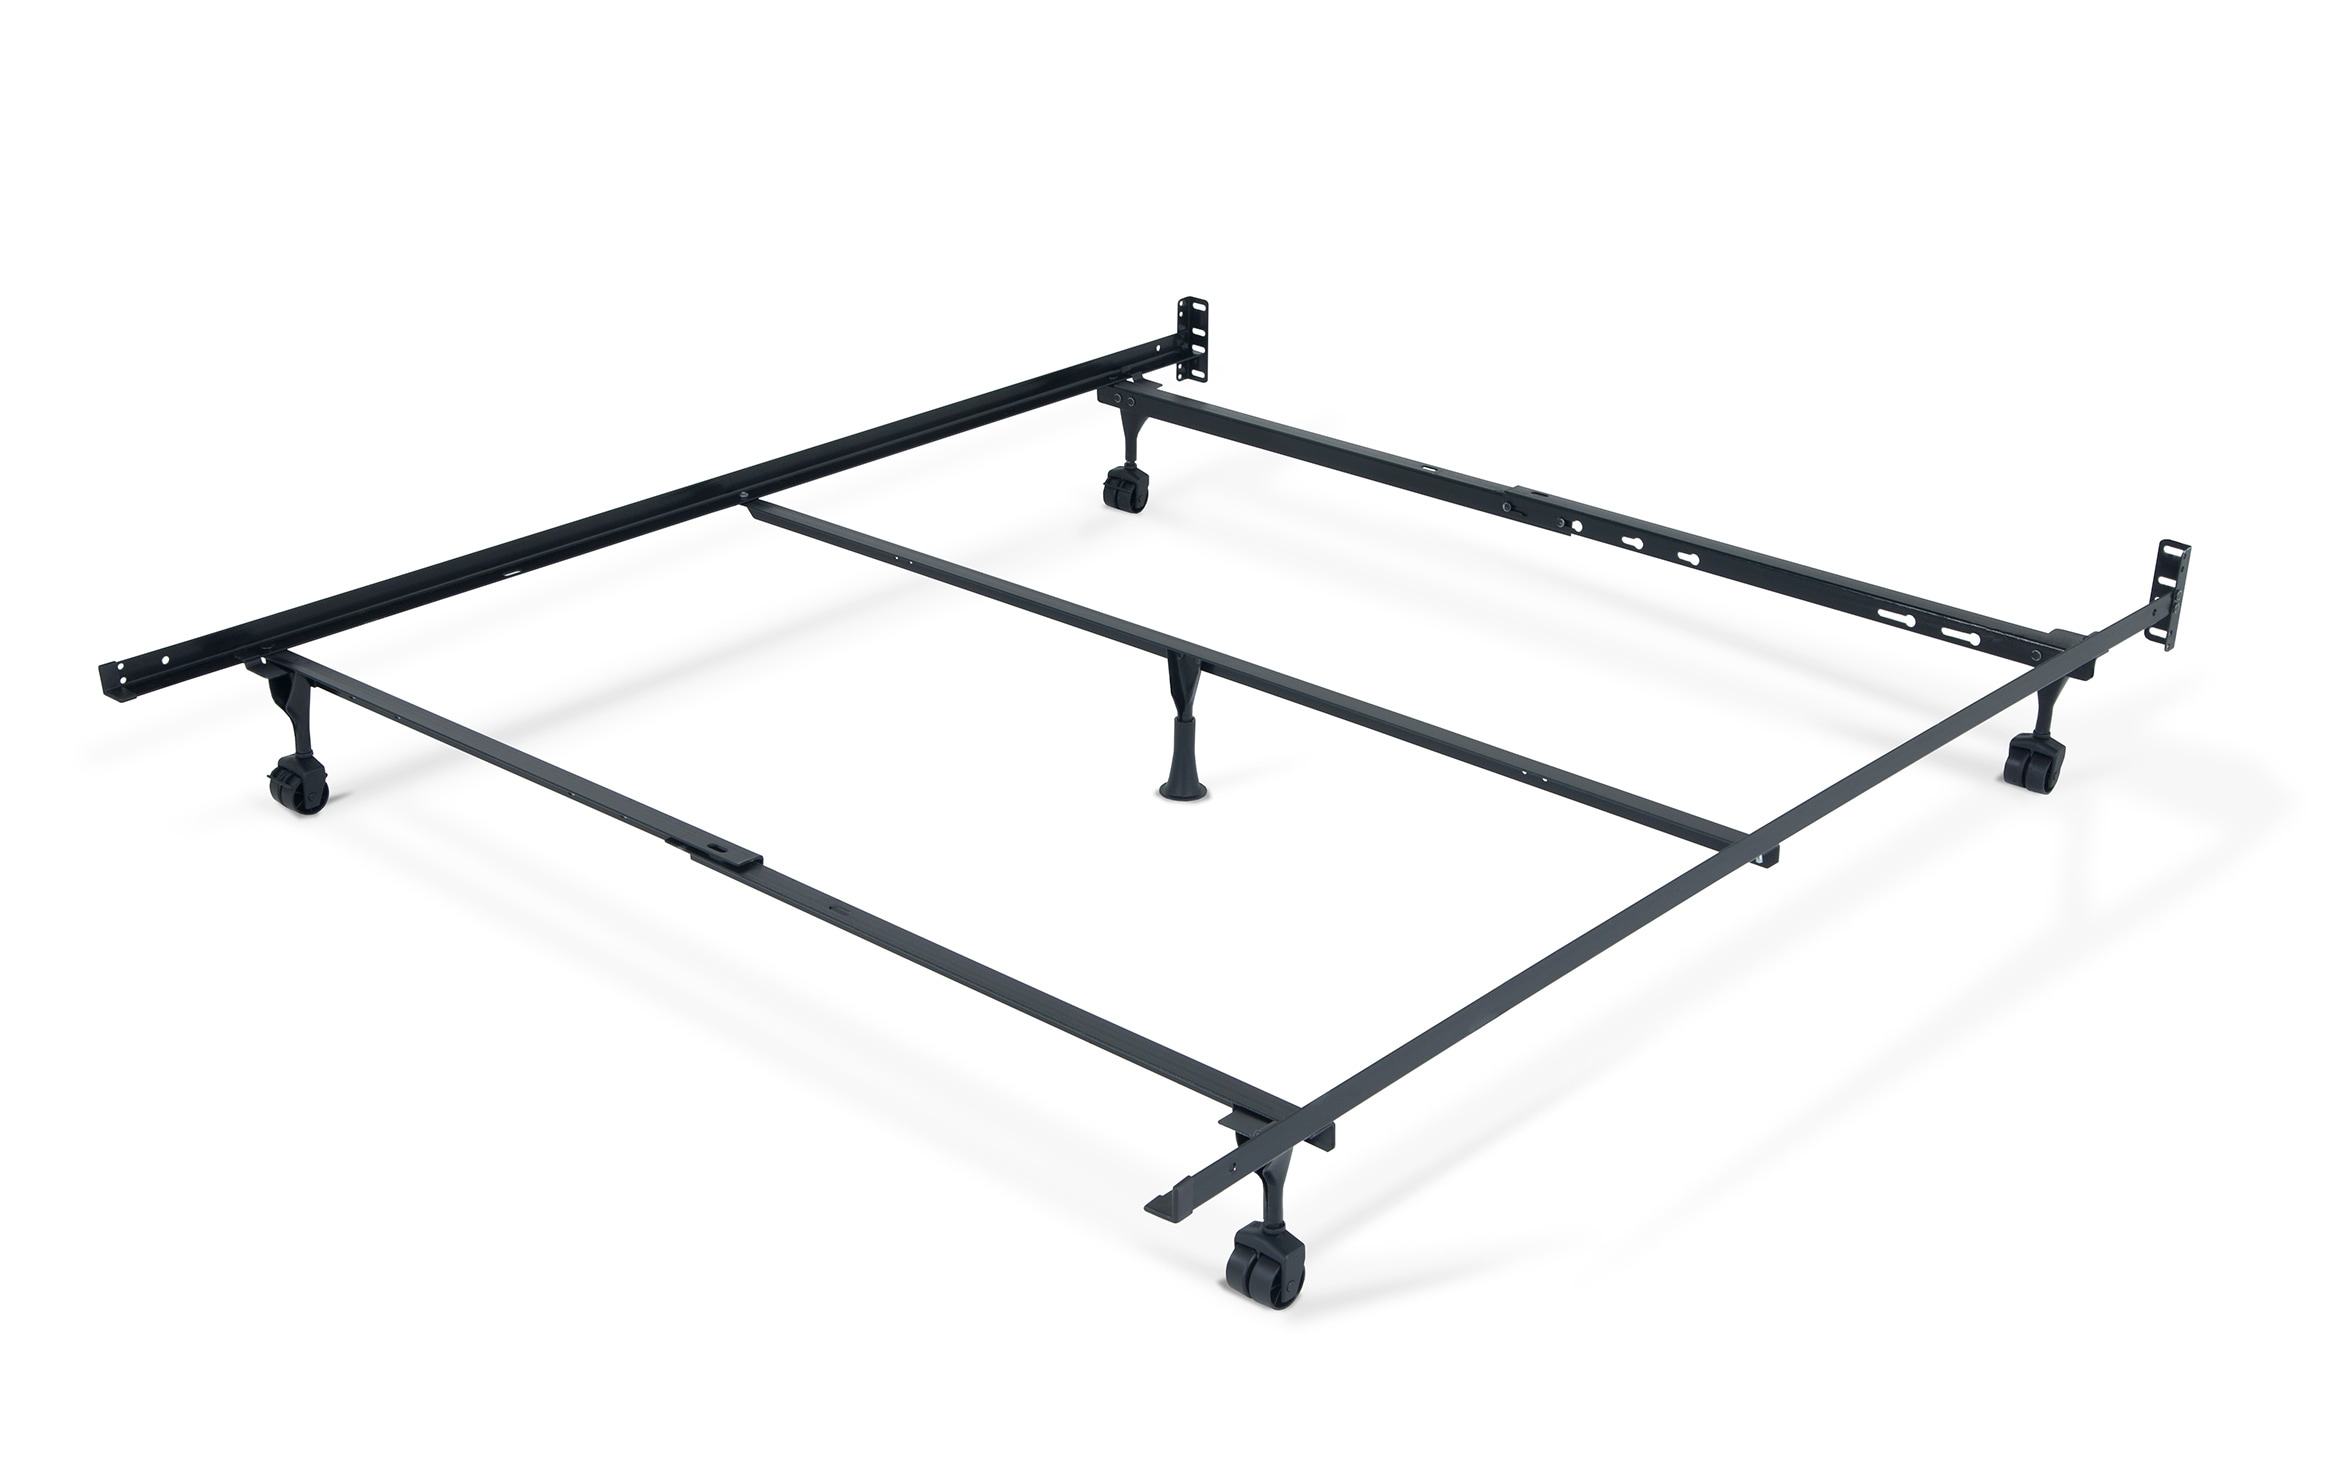 Queen King California Bed Frame, Metal Bed Rails For King Size Bed